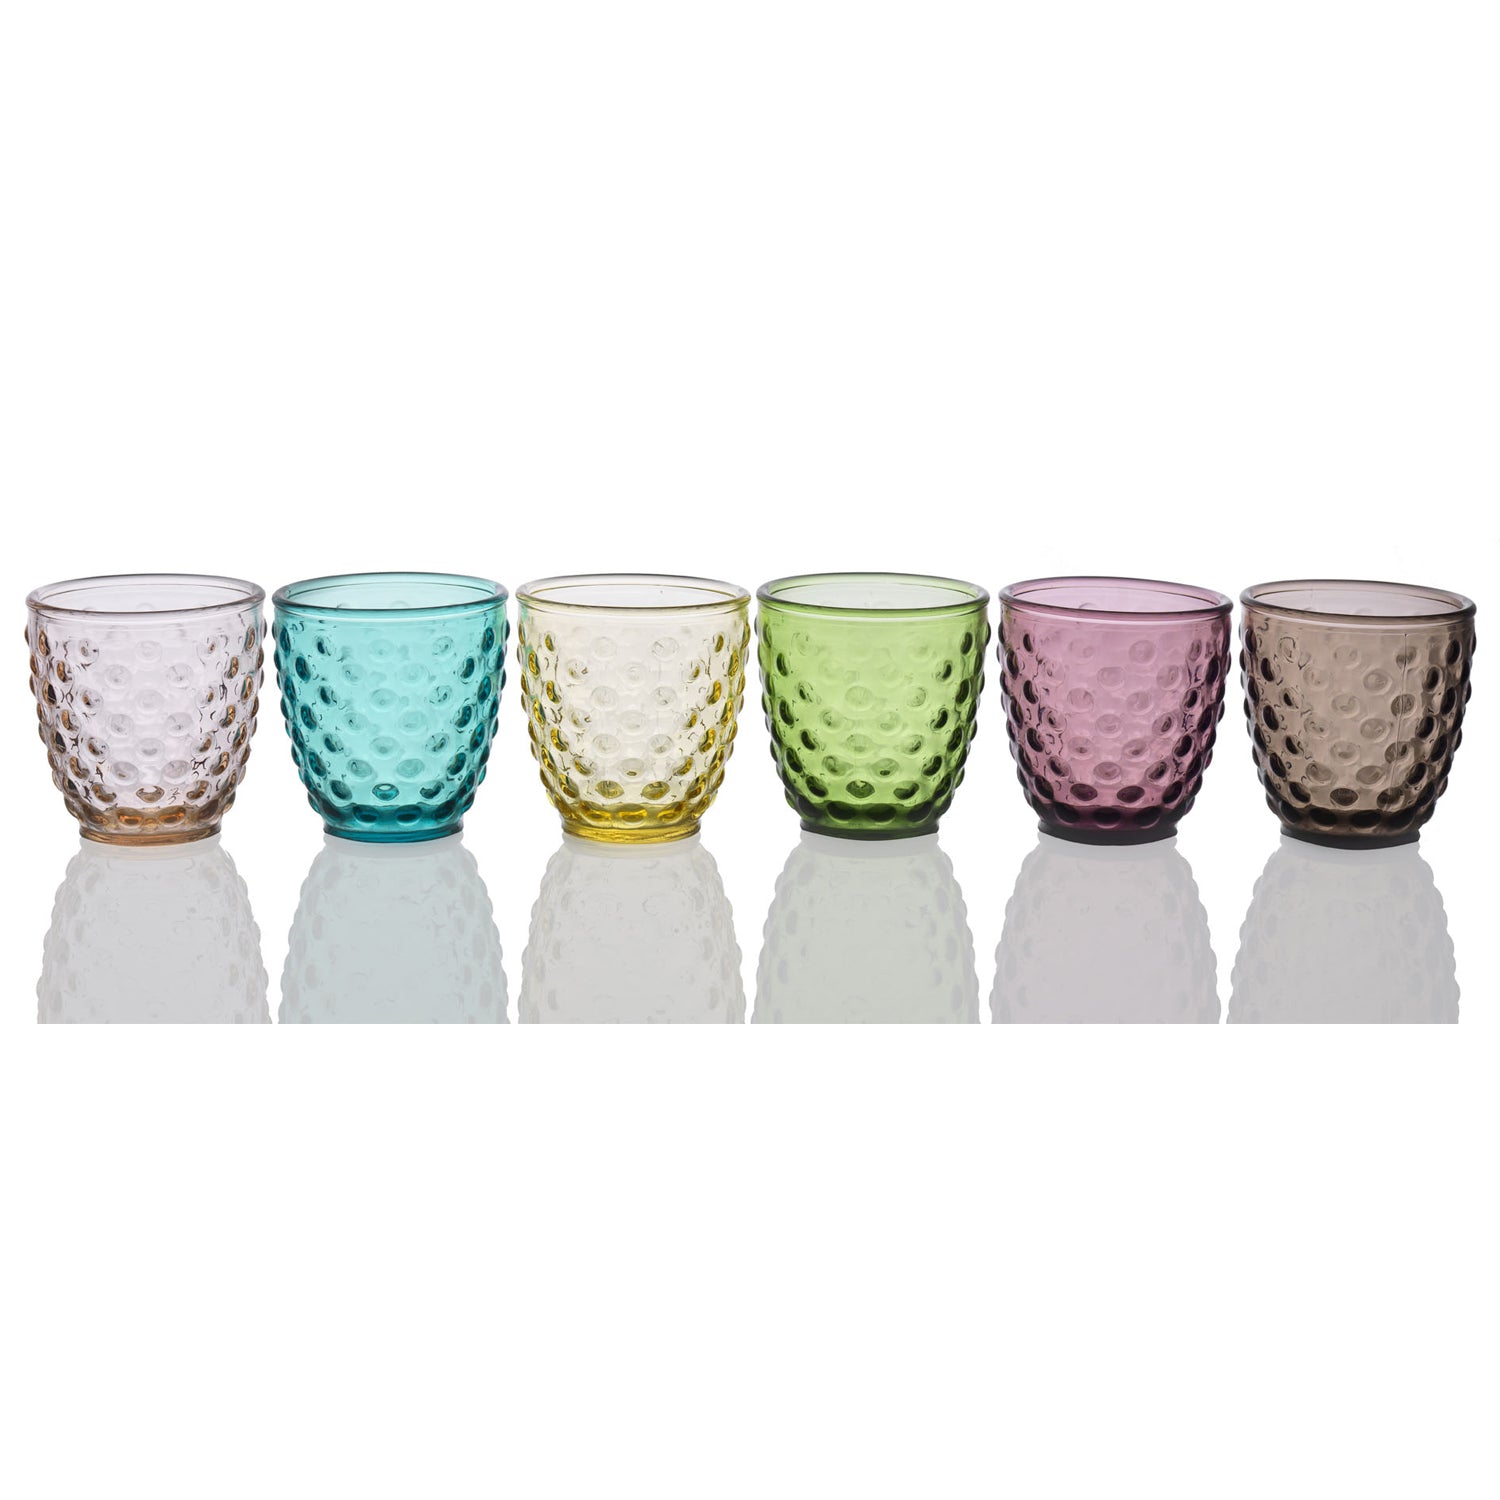 IVV Bolle Set of 6 water glasses assorted colours, cl 29